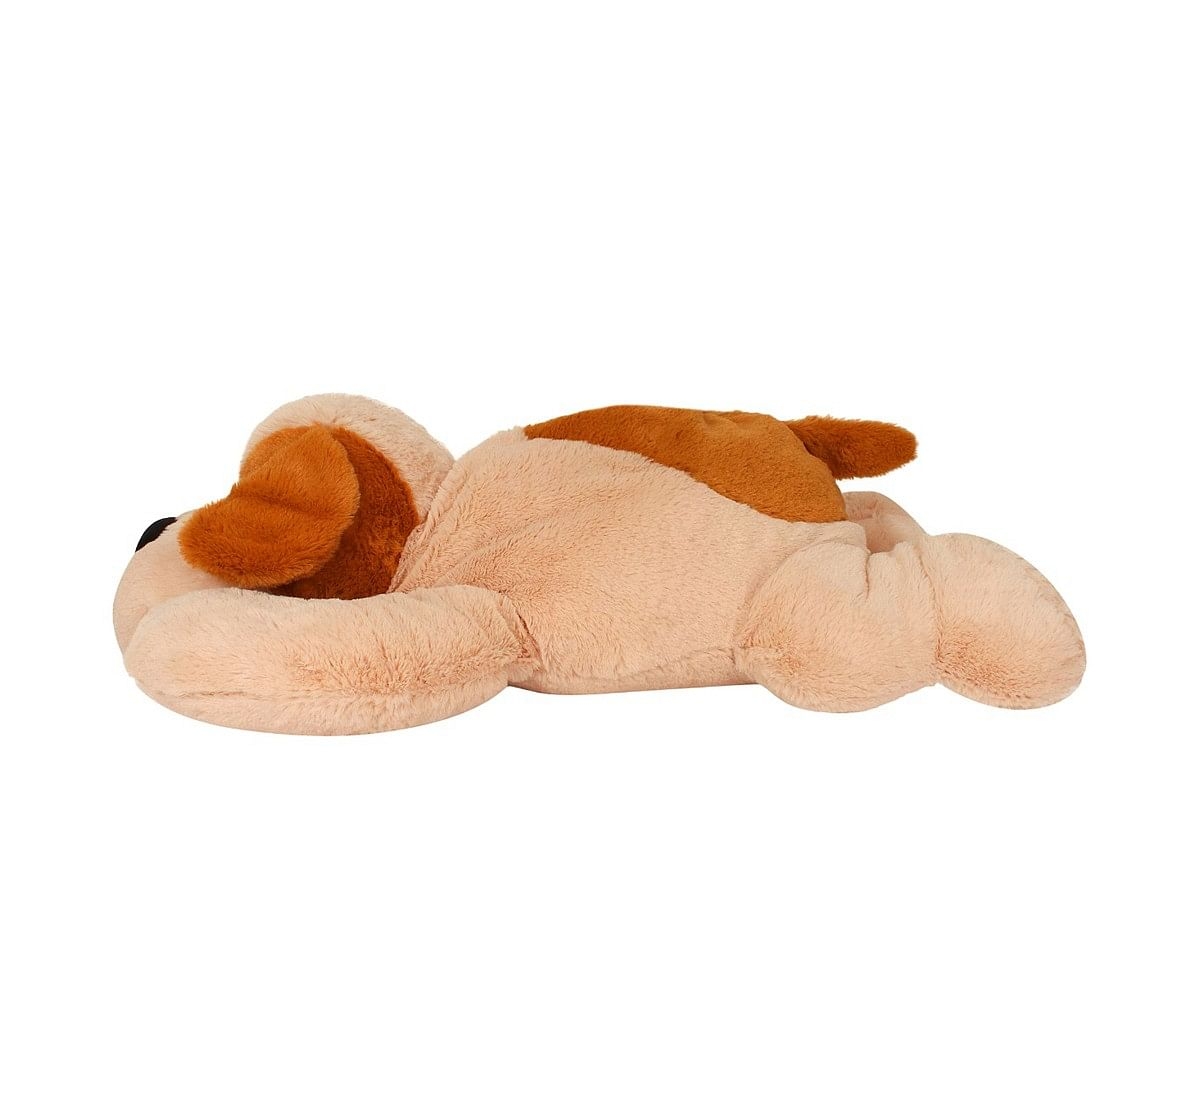 Qingdao Cuddles Laying Dog Cream And Brown Quirky Soft Toys for Kids age 12M+ - 20 Cm 